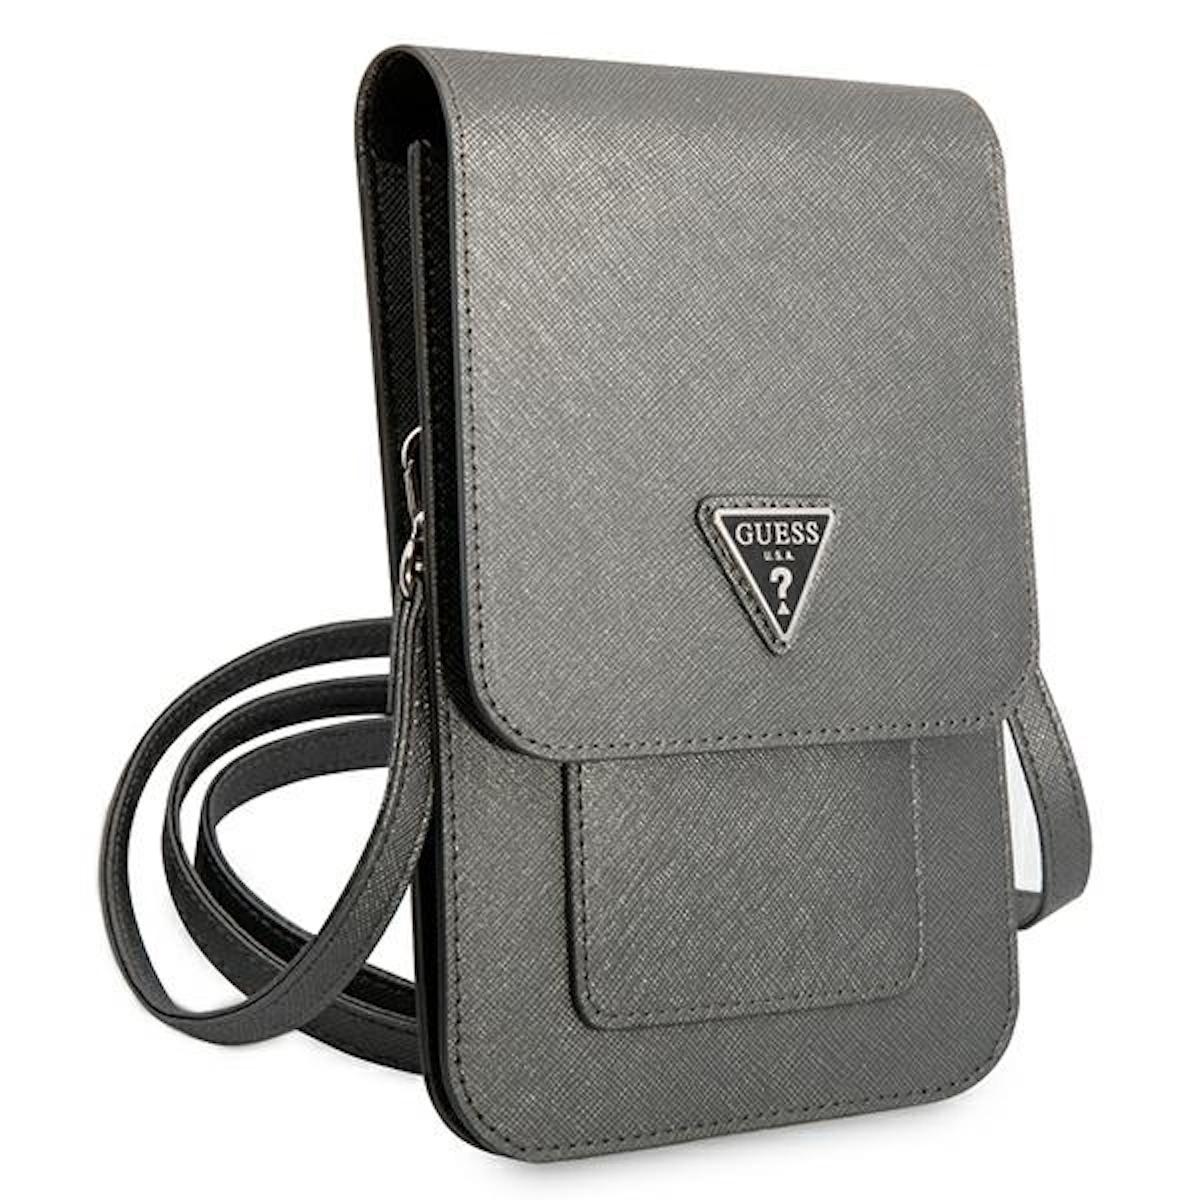 Cover, Triangle Universelle Full Universell, Grau Umhängetasche, Saffiano Tasche, GUESS